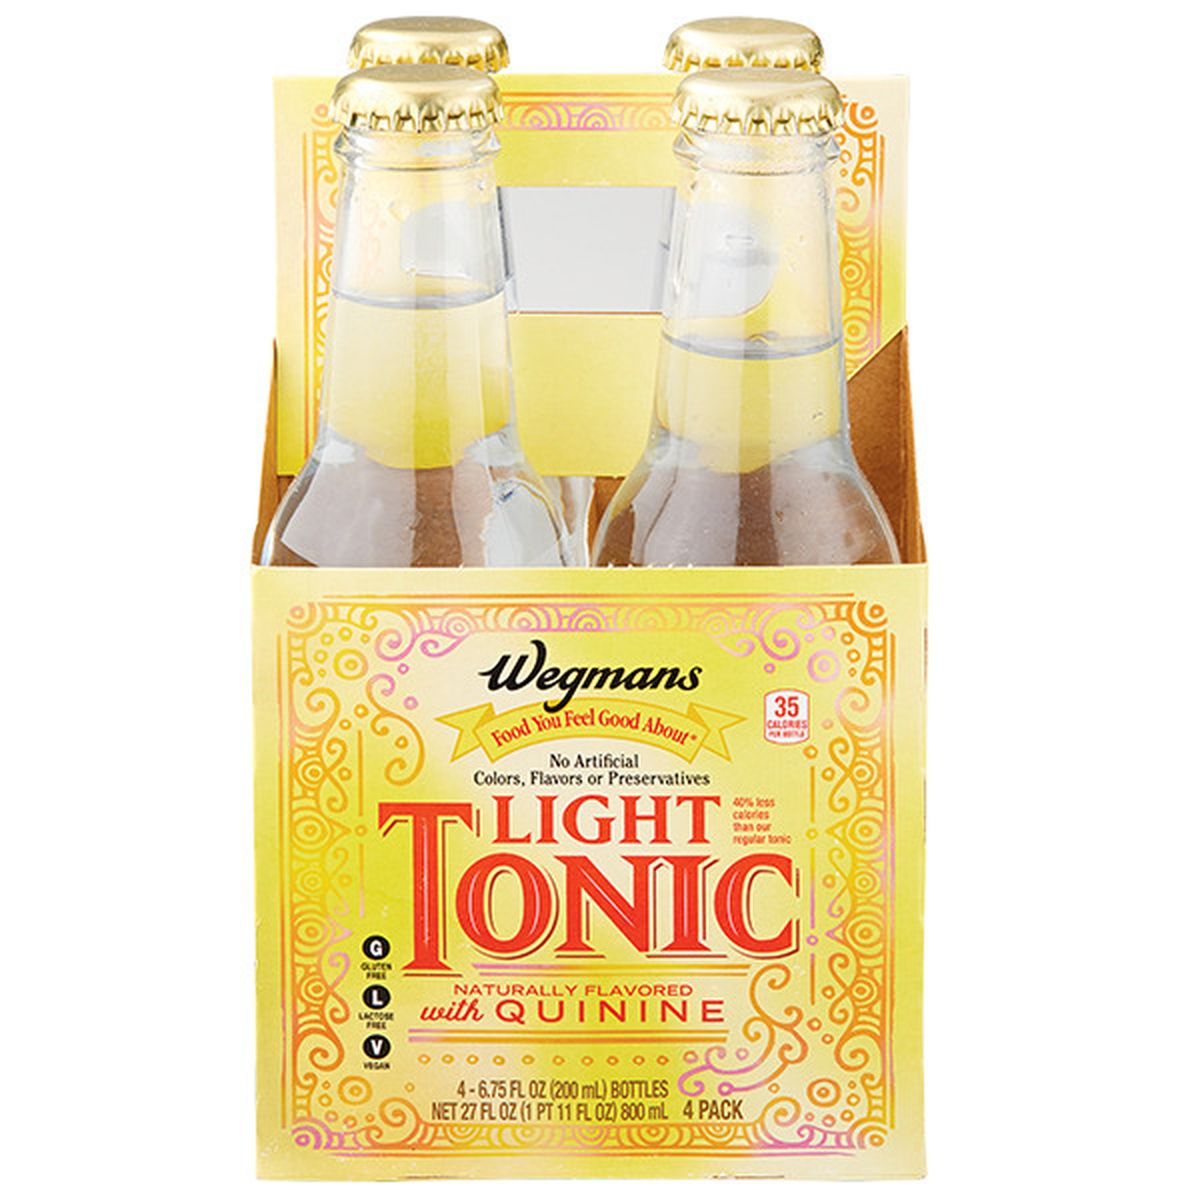 Calories in Wegmans Light Tonic with Quinine, 4 Pack